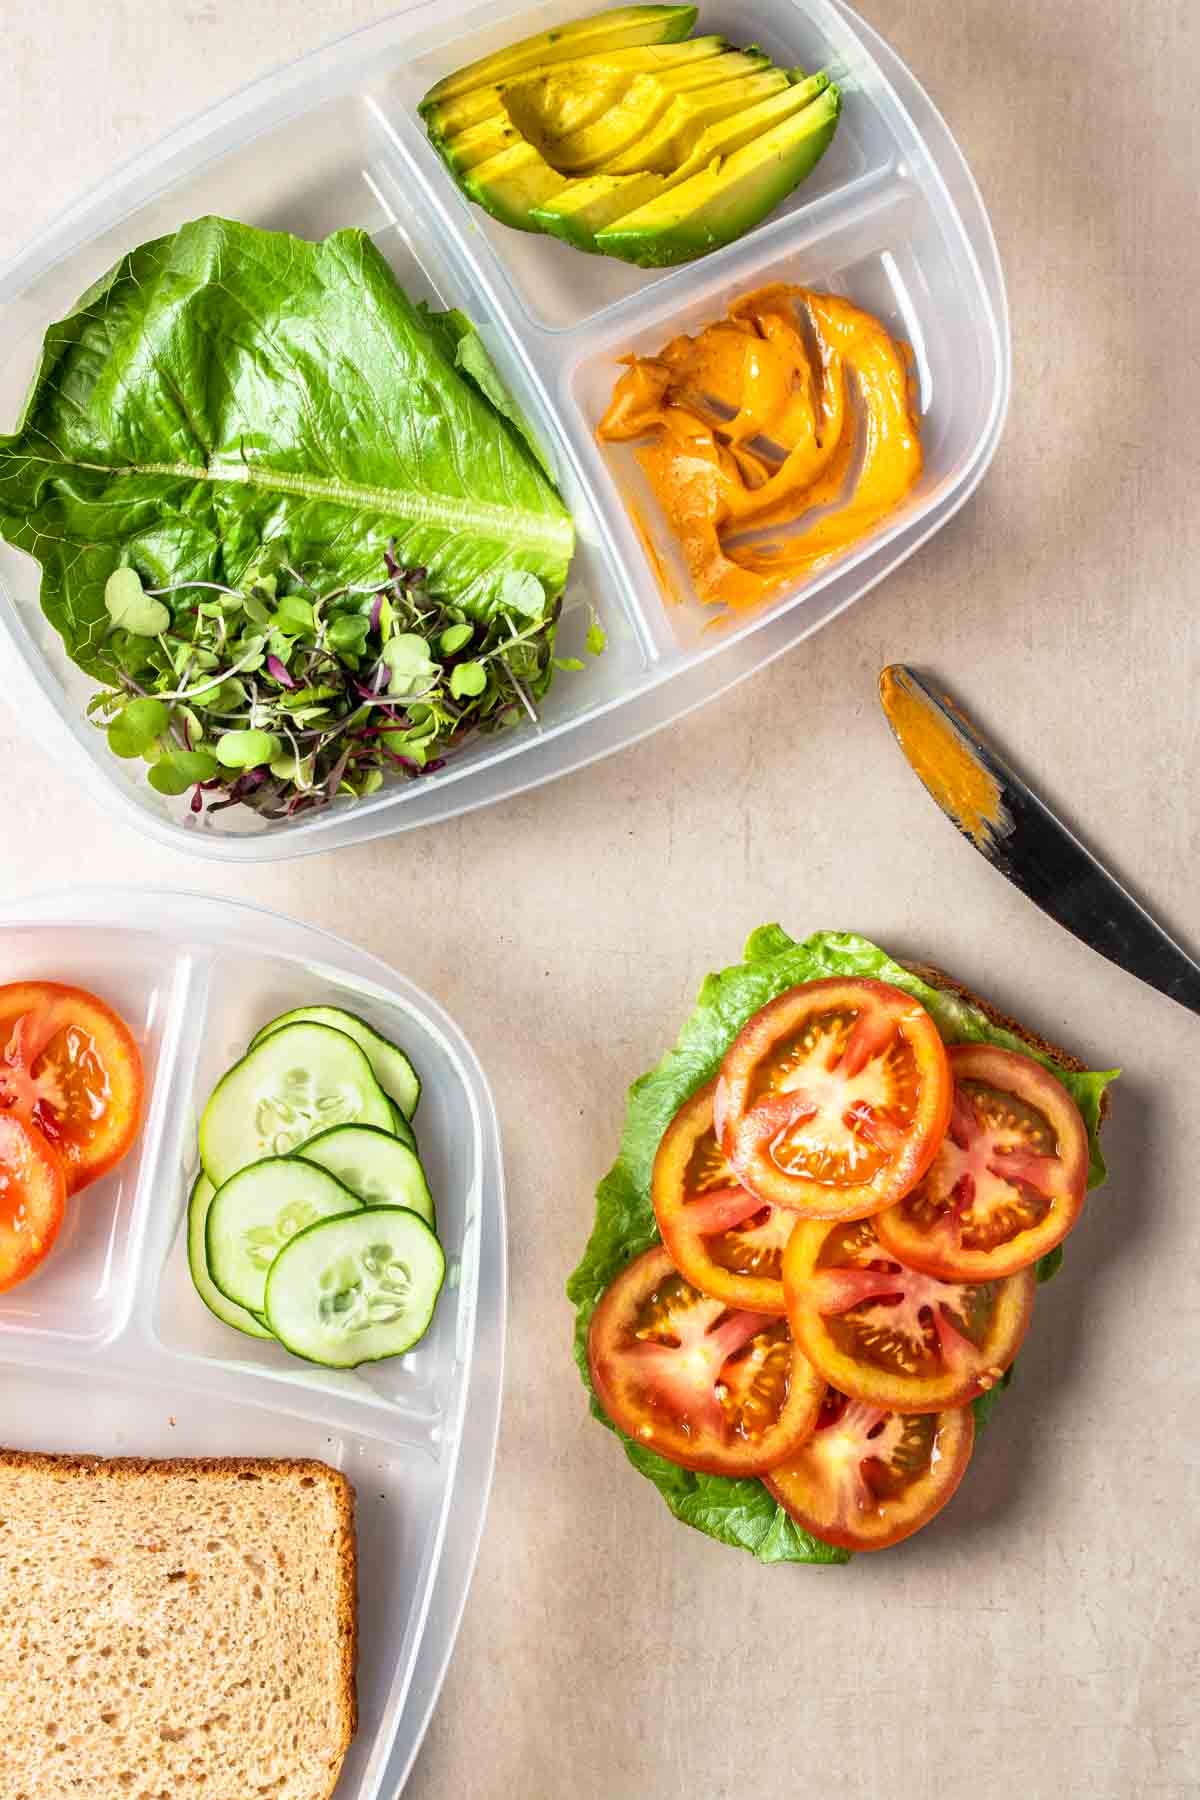 A piece of bread with lettuce and tomatoes on top next to a knife and containers with sandwich toppings in them.